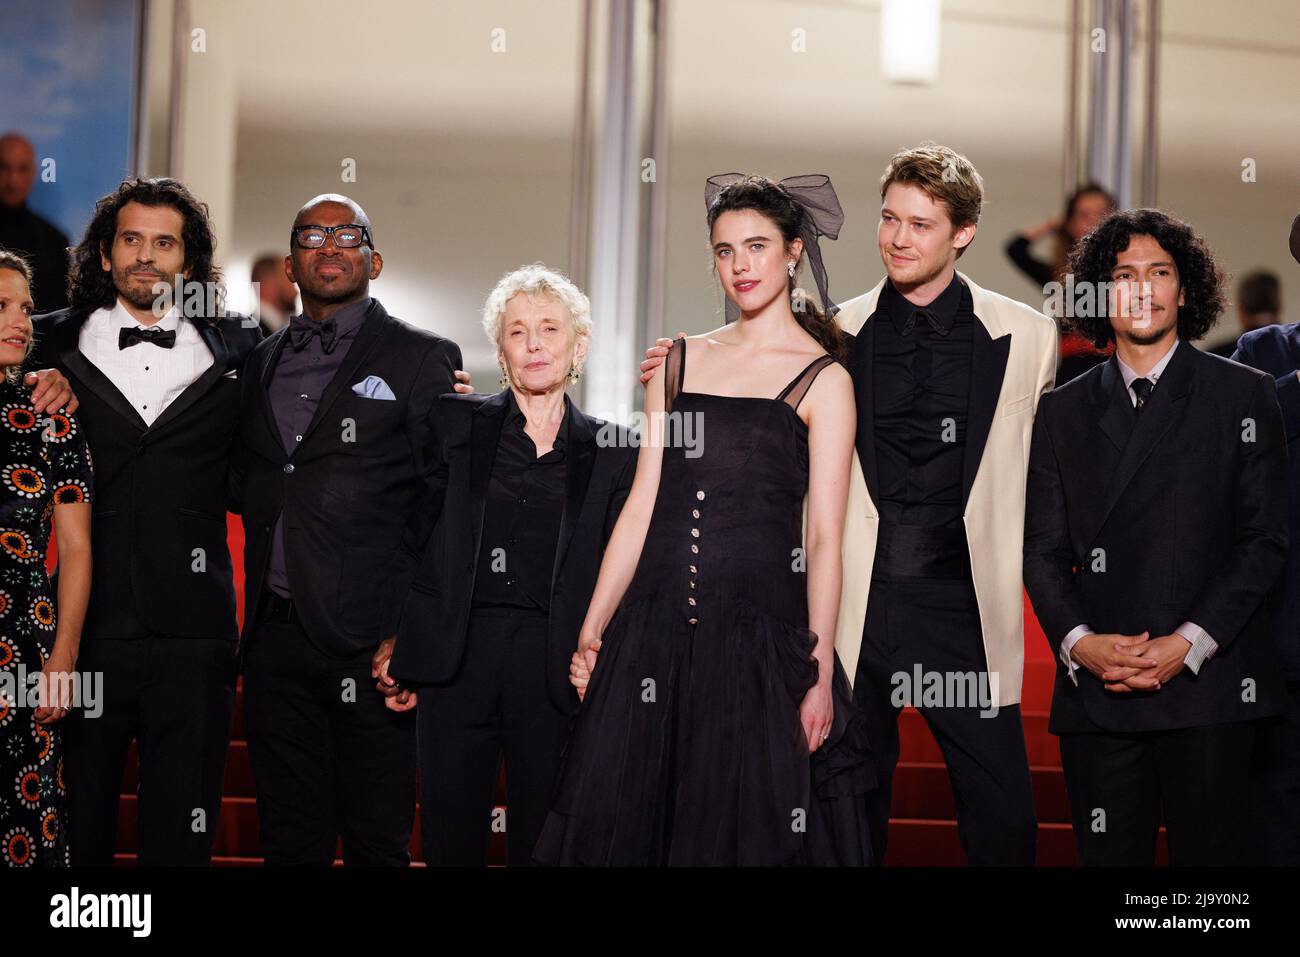 Olivier Delbosc, Nick Romano, Claire Denis, Margaret Qualley, Joe Alwyn,  Danny Ramirez and Stuart A. Staples attending the screening of "Stars At  Noon" during the 75th annual Cannes film festival at Palais